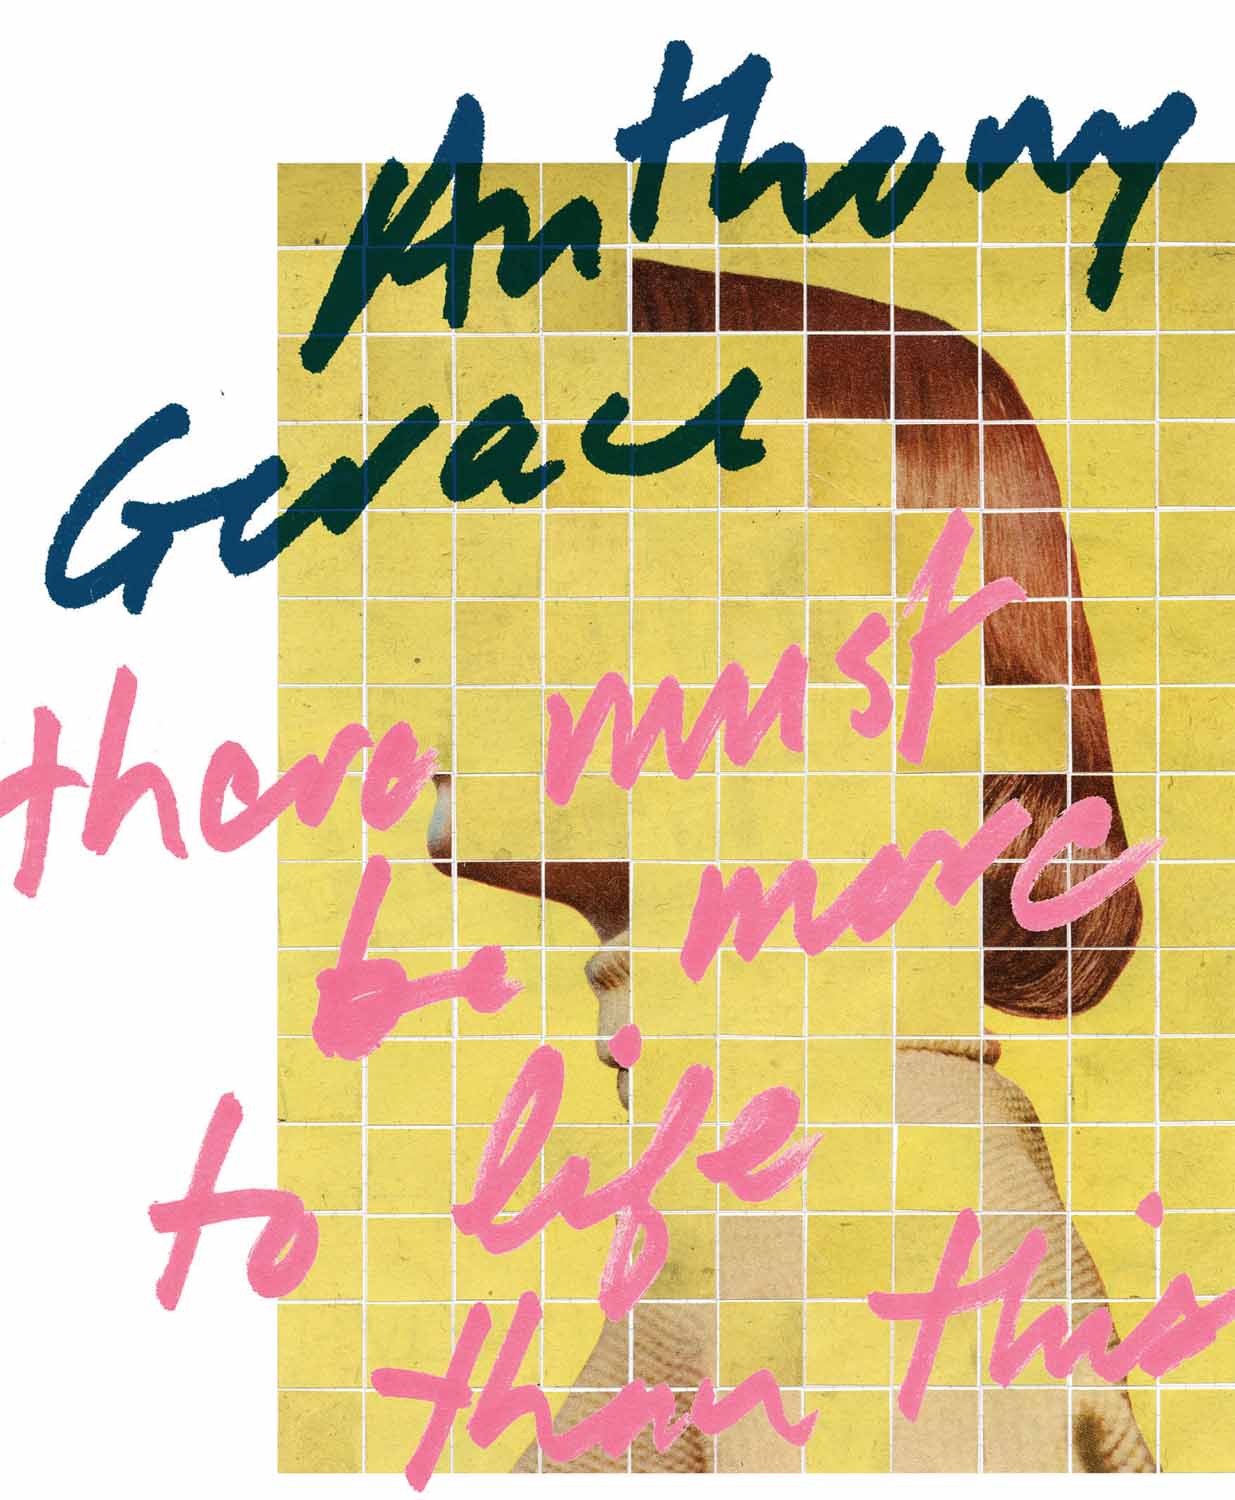 Anthony Gerace - There must be more to life than this